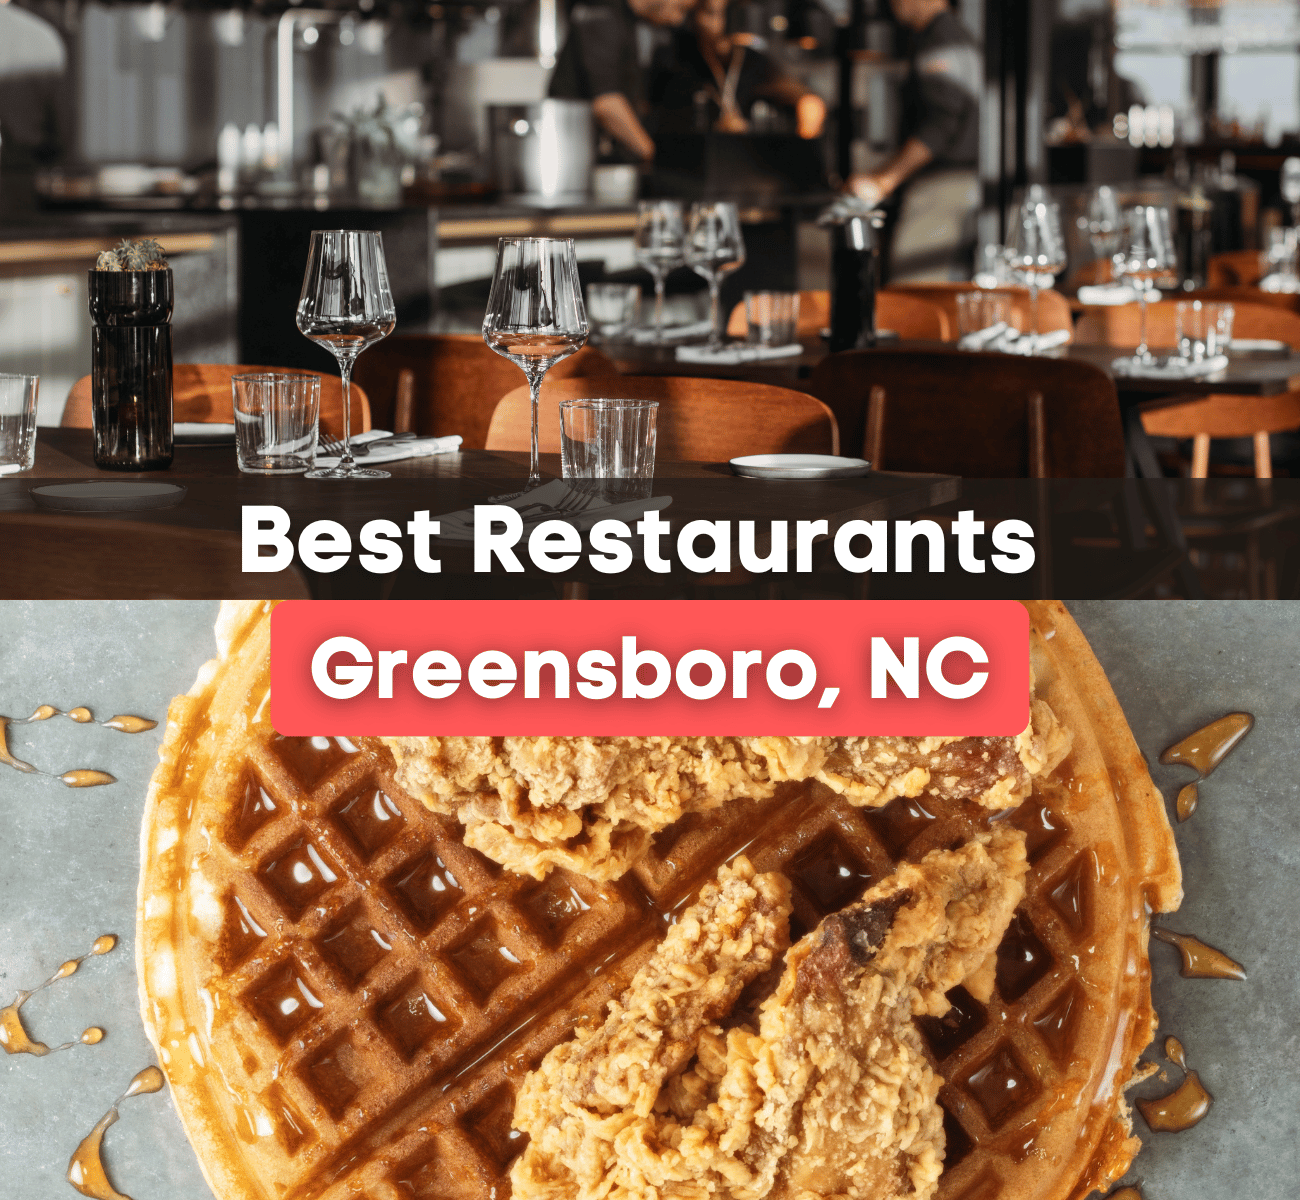 Best Restaurants in Greensboro, NC - chicken and waffles and restaurant